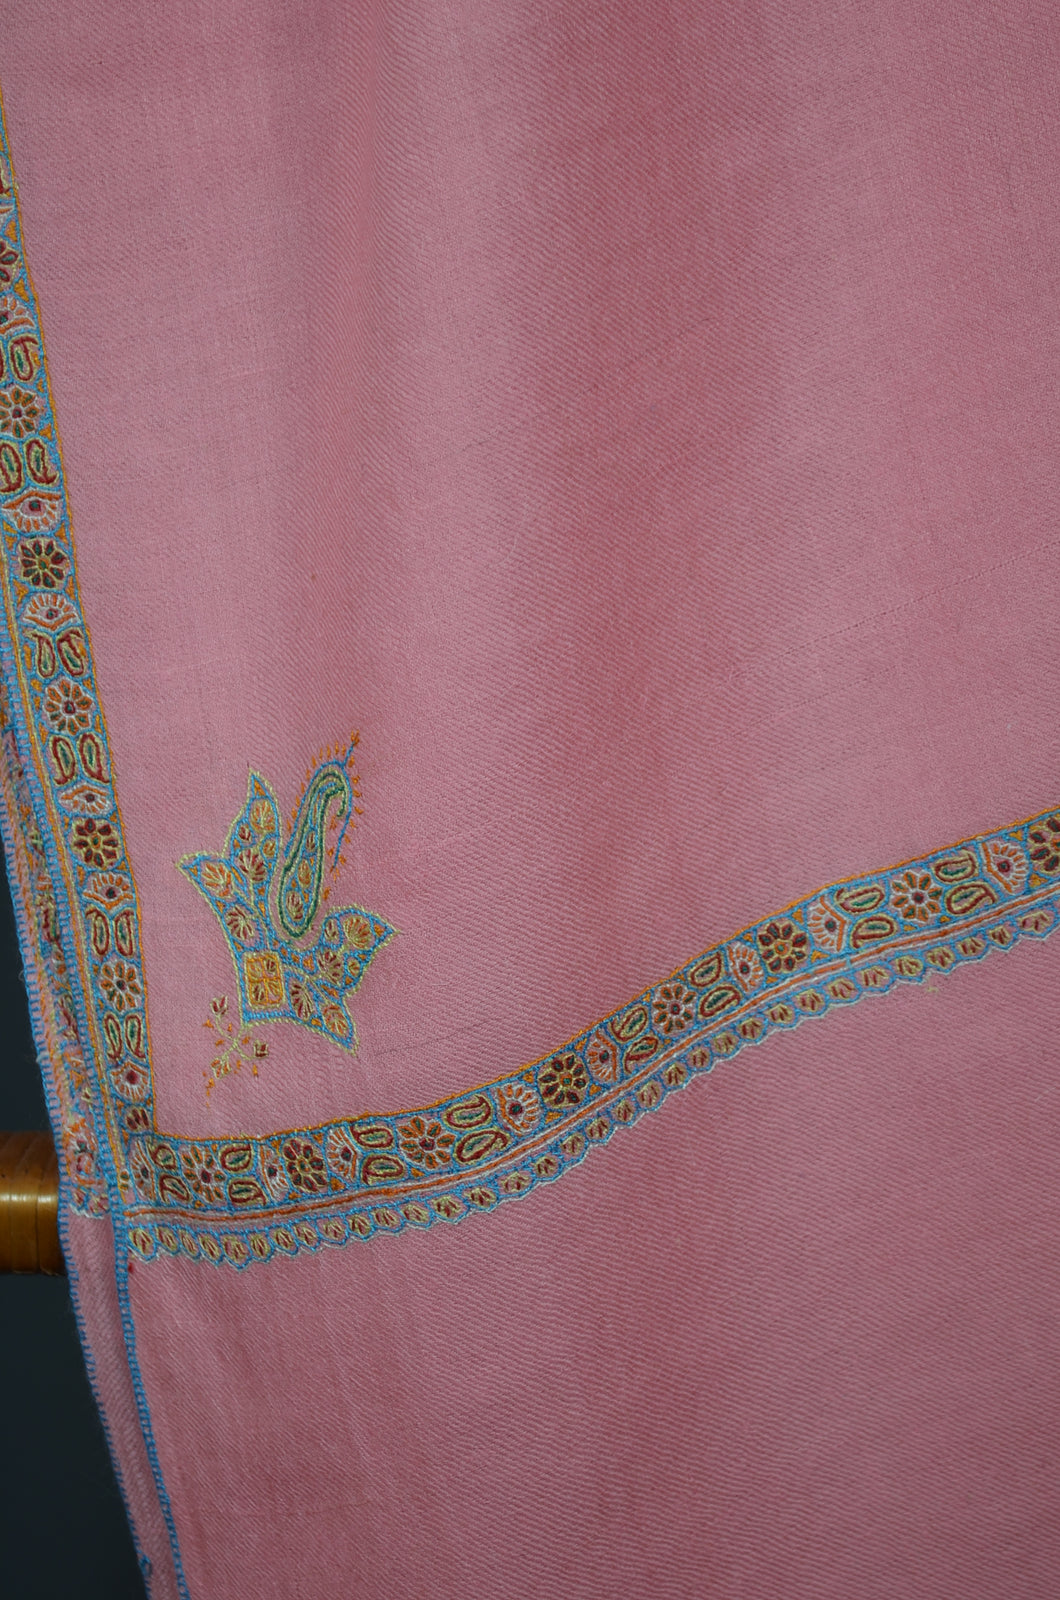 Pink Border Embroidery Cashmere Pashmina Scarf